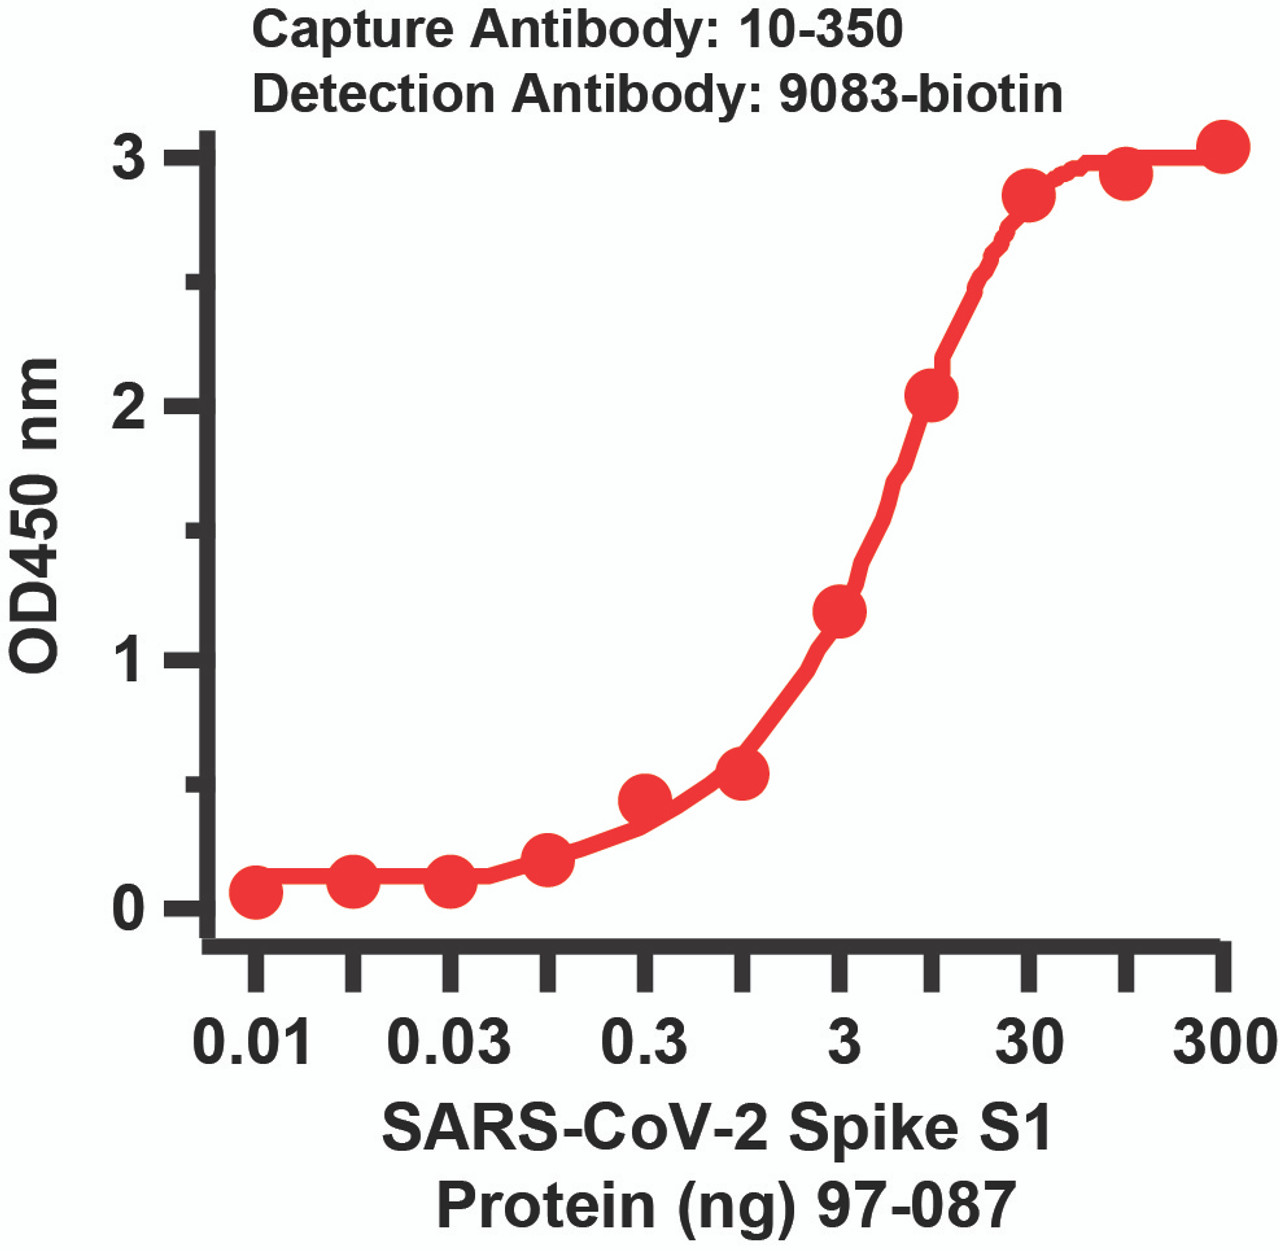 Figure 2 Sandwich ELISA for SARS-CoV-2 (COVID-19) Matched Pair Spike S1 Antibodies
Antibodies: SARS-CoV-2 (COVID-19) Spike Antibodies, 10-350 and 9083-biotin. A sandwich ELISA was performed using SARS-CoV-2 Spike S1 antibody (10-350, 2ug/ml) as capture antibody, the Spike S1 recombinant protein as the binding protein (97-087) , and the anti-SARS-CoV-2 Spike S1 antibody (9083-biotin, 1ug/ml) as the detection antibody. Secondary: Streptavidin-HRP at 1:10000 dilution. Detection range is from 0.03 ng to 300 ng. EC50 = 5.1 ng